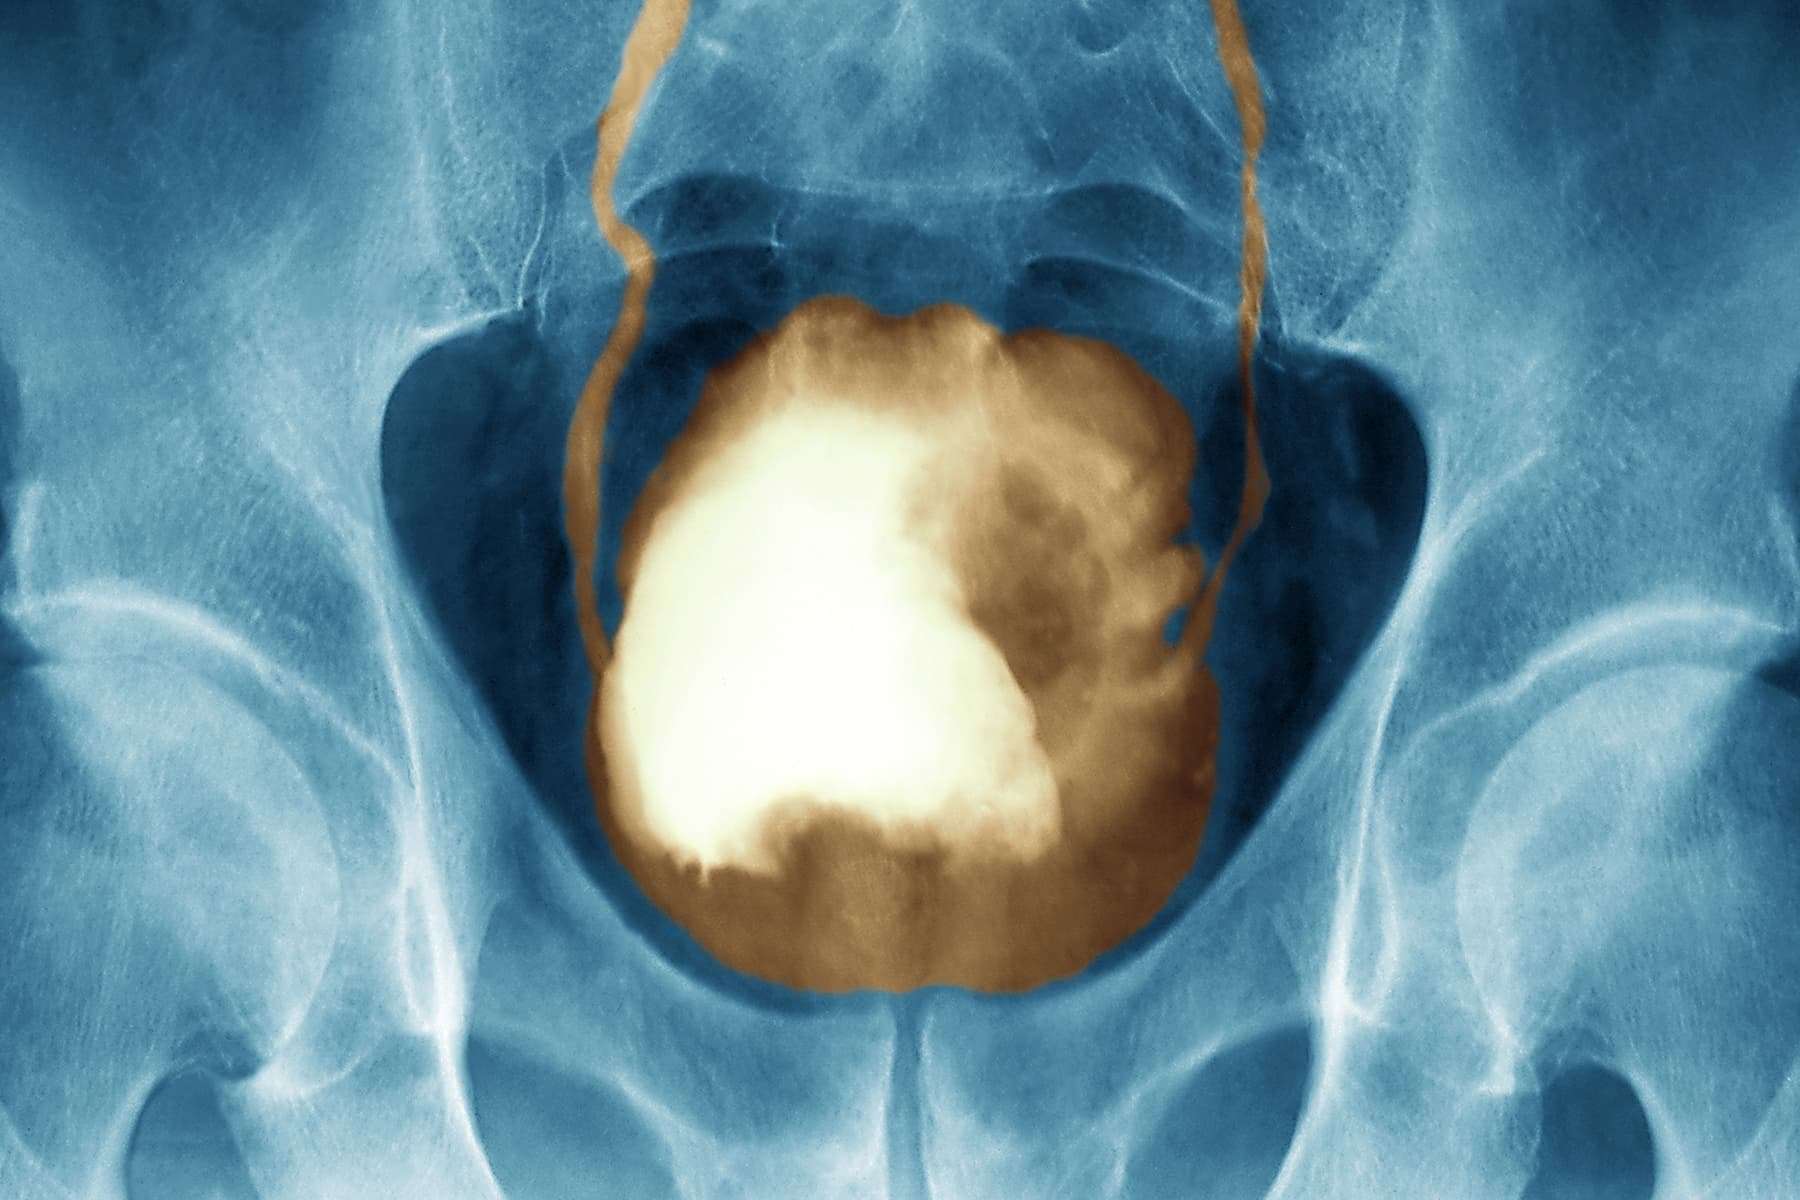 Bladder Cancer Symptoms Pictures: Warning Signs, Treatments, Survival Rates